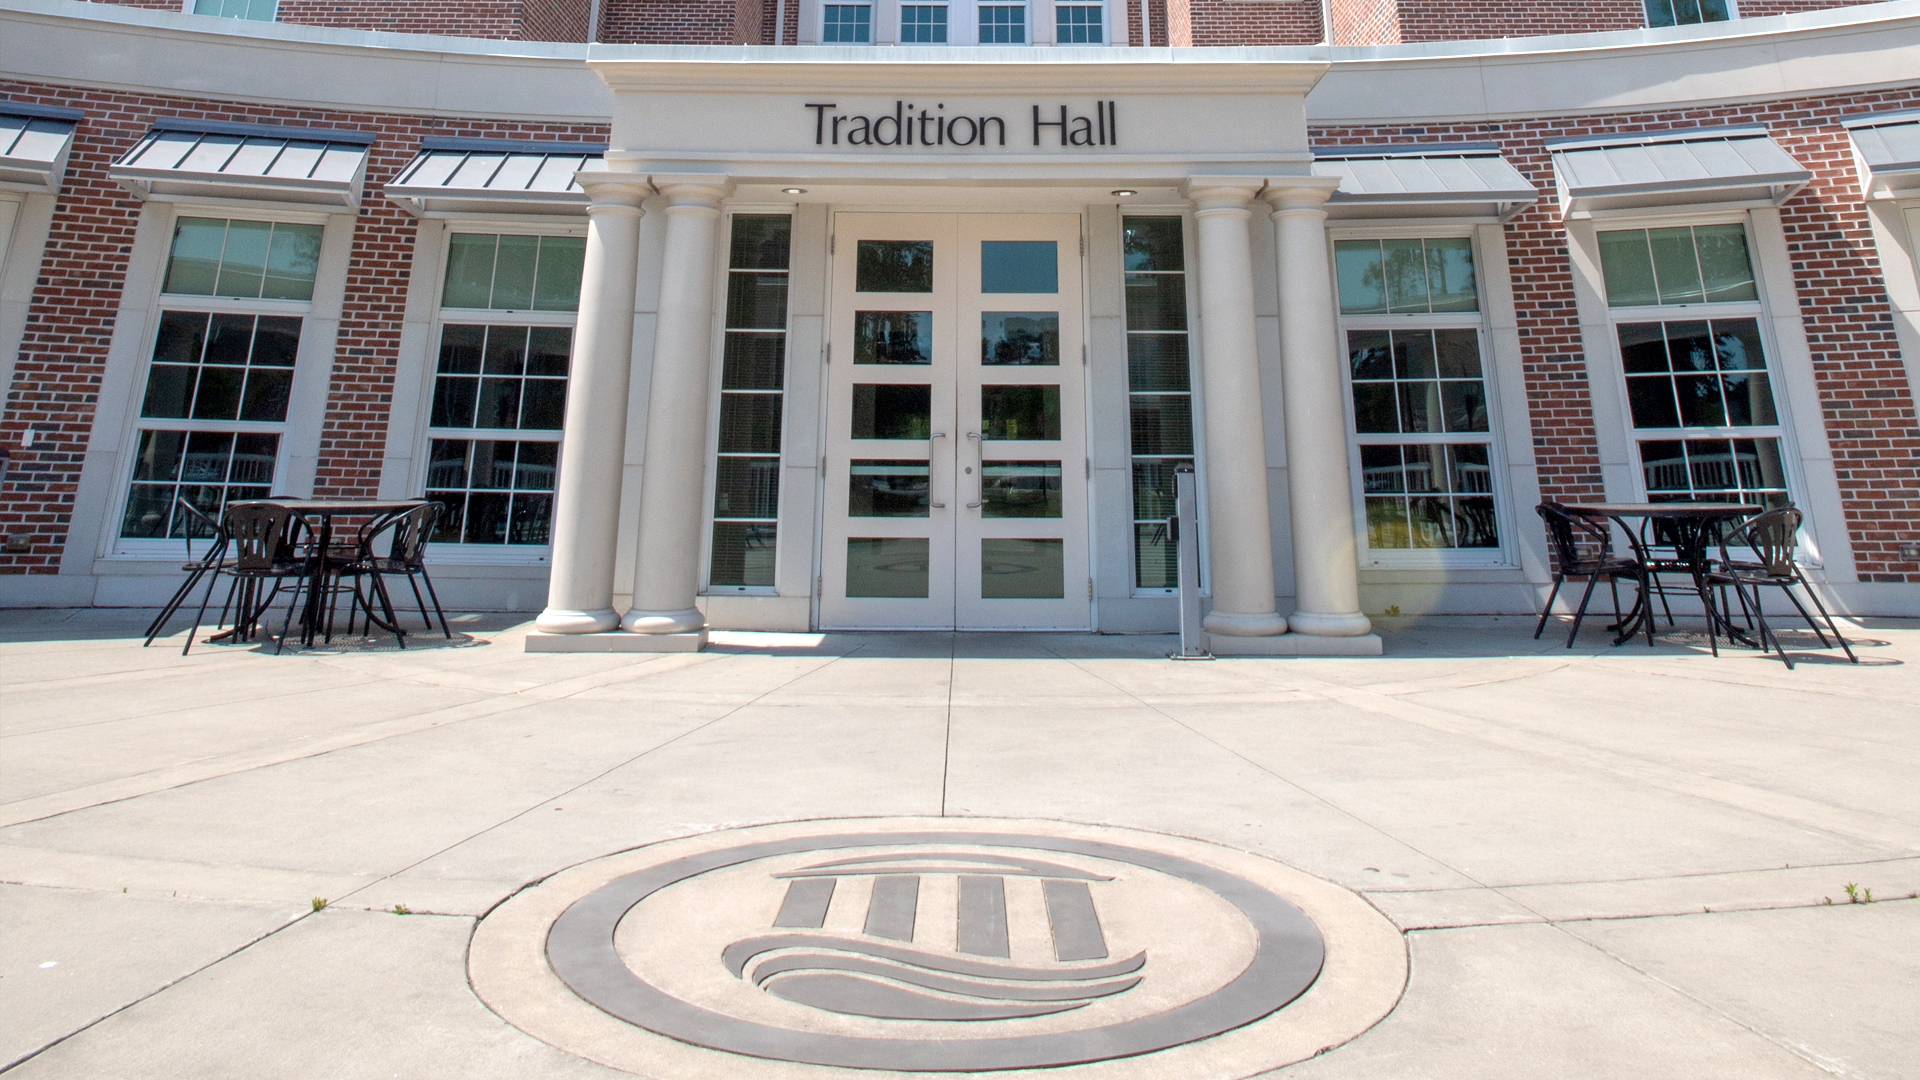 Atheneum Seal shown in front of Tradition Hall, and it is a tradition to not step on them.